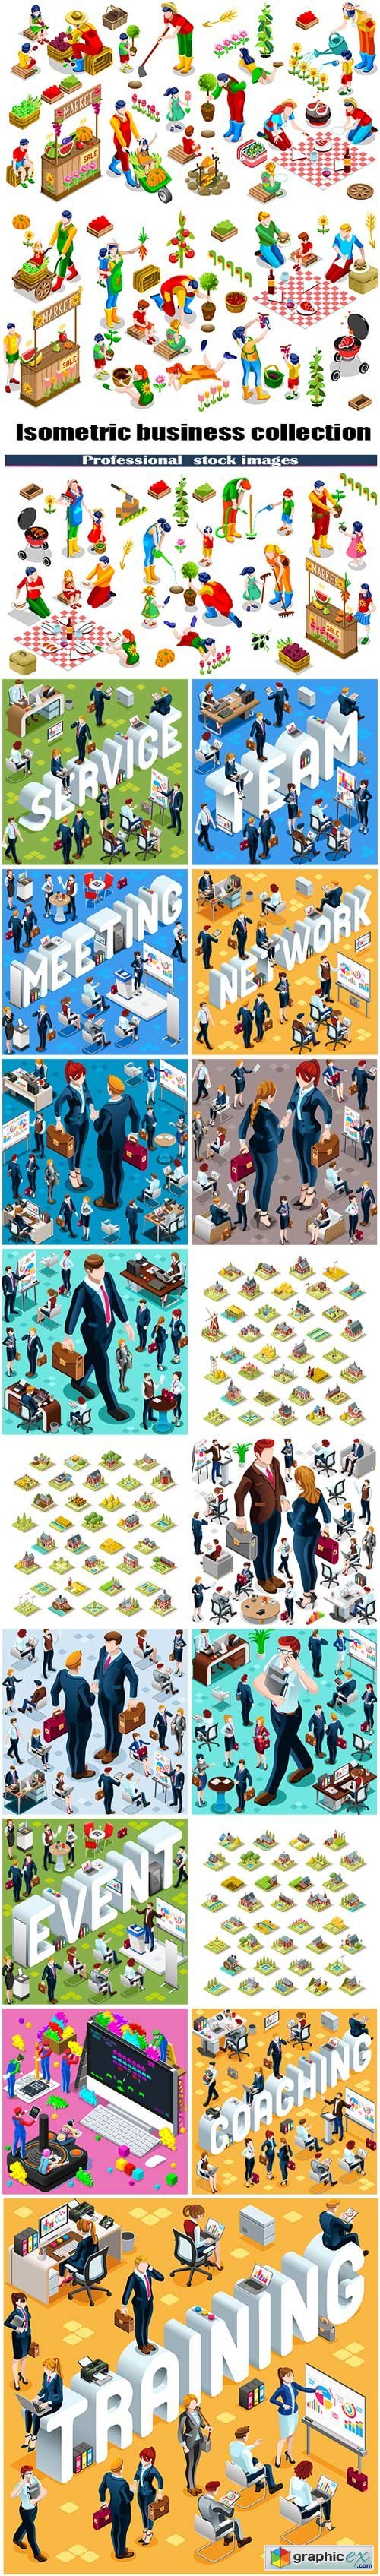 Isometric business collection